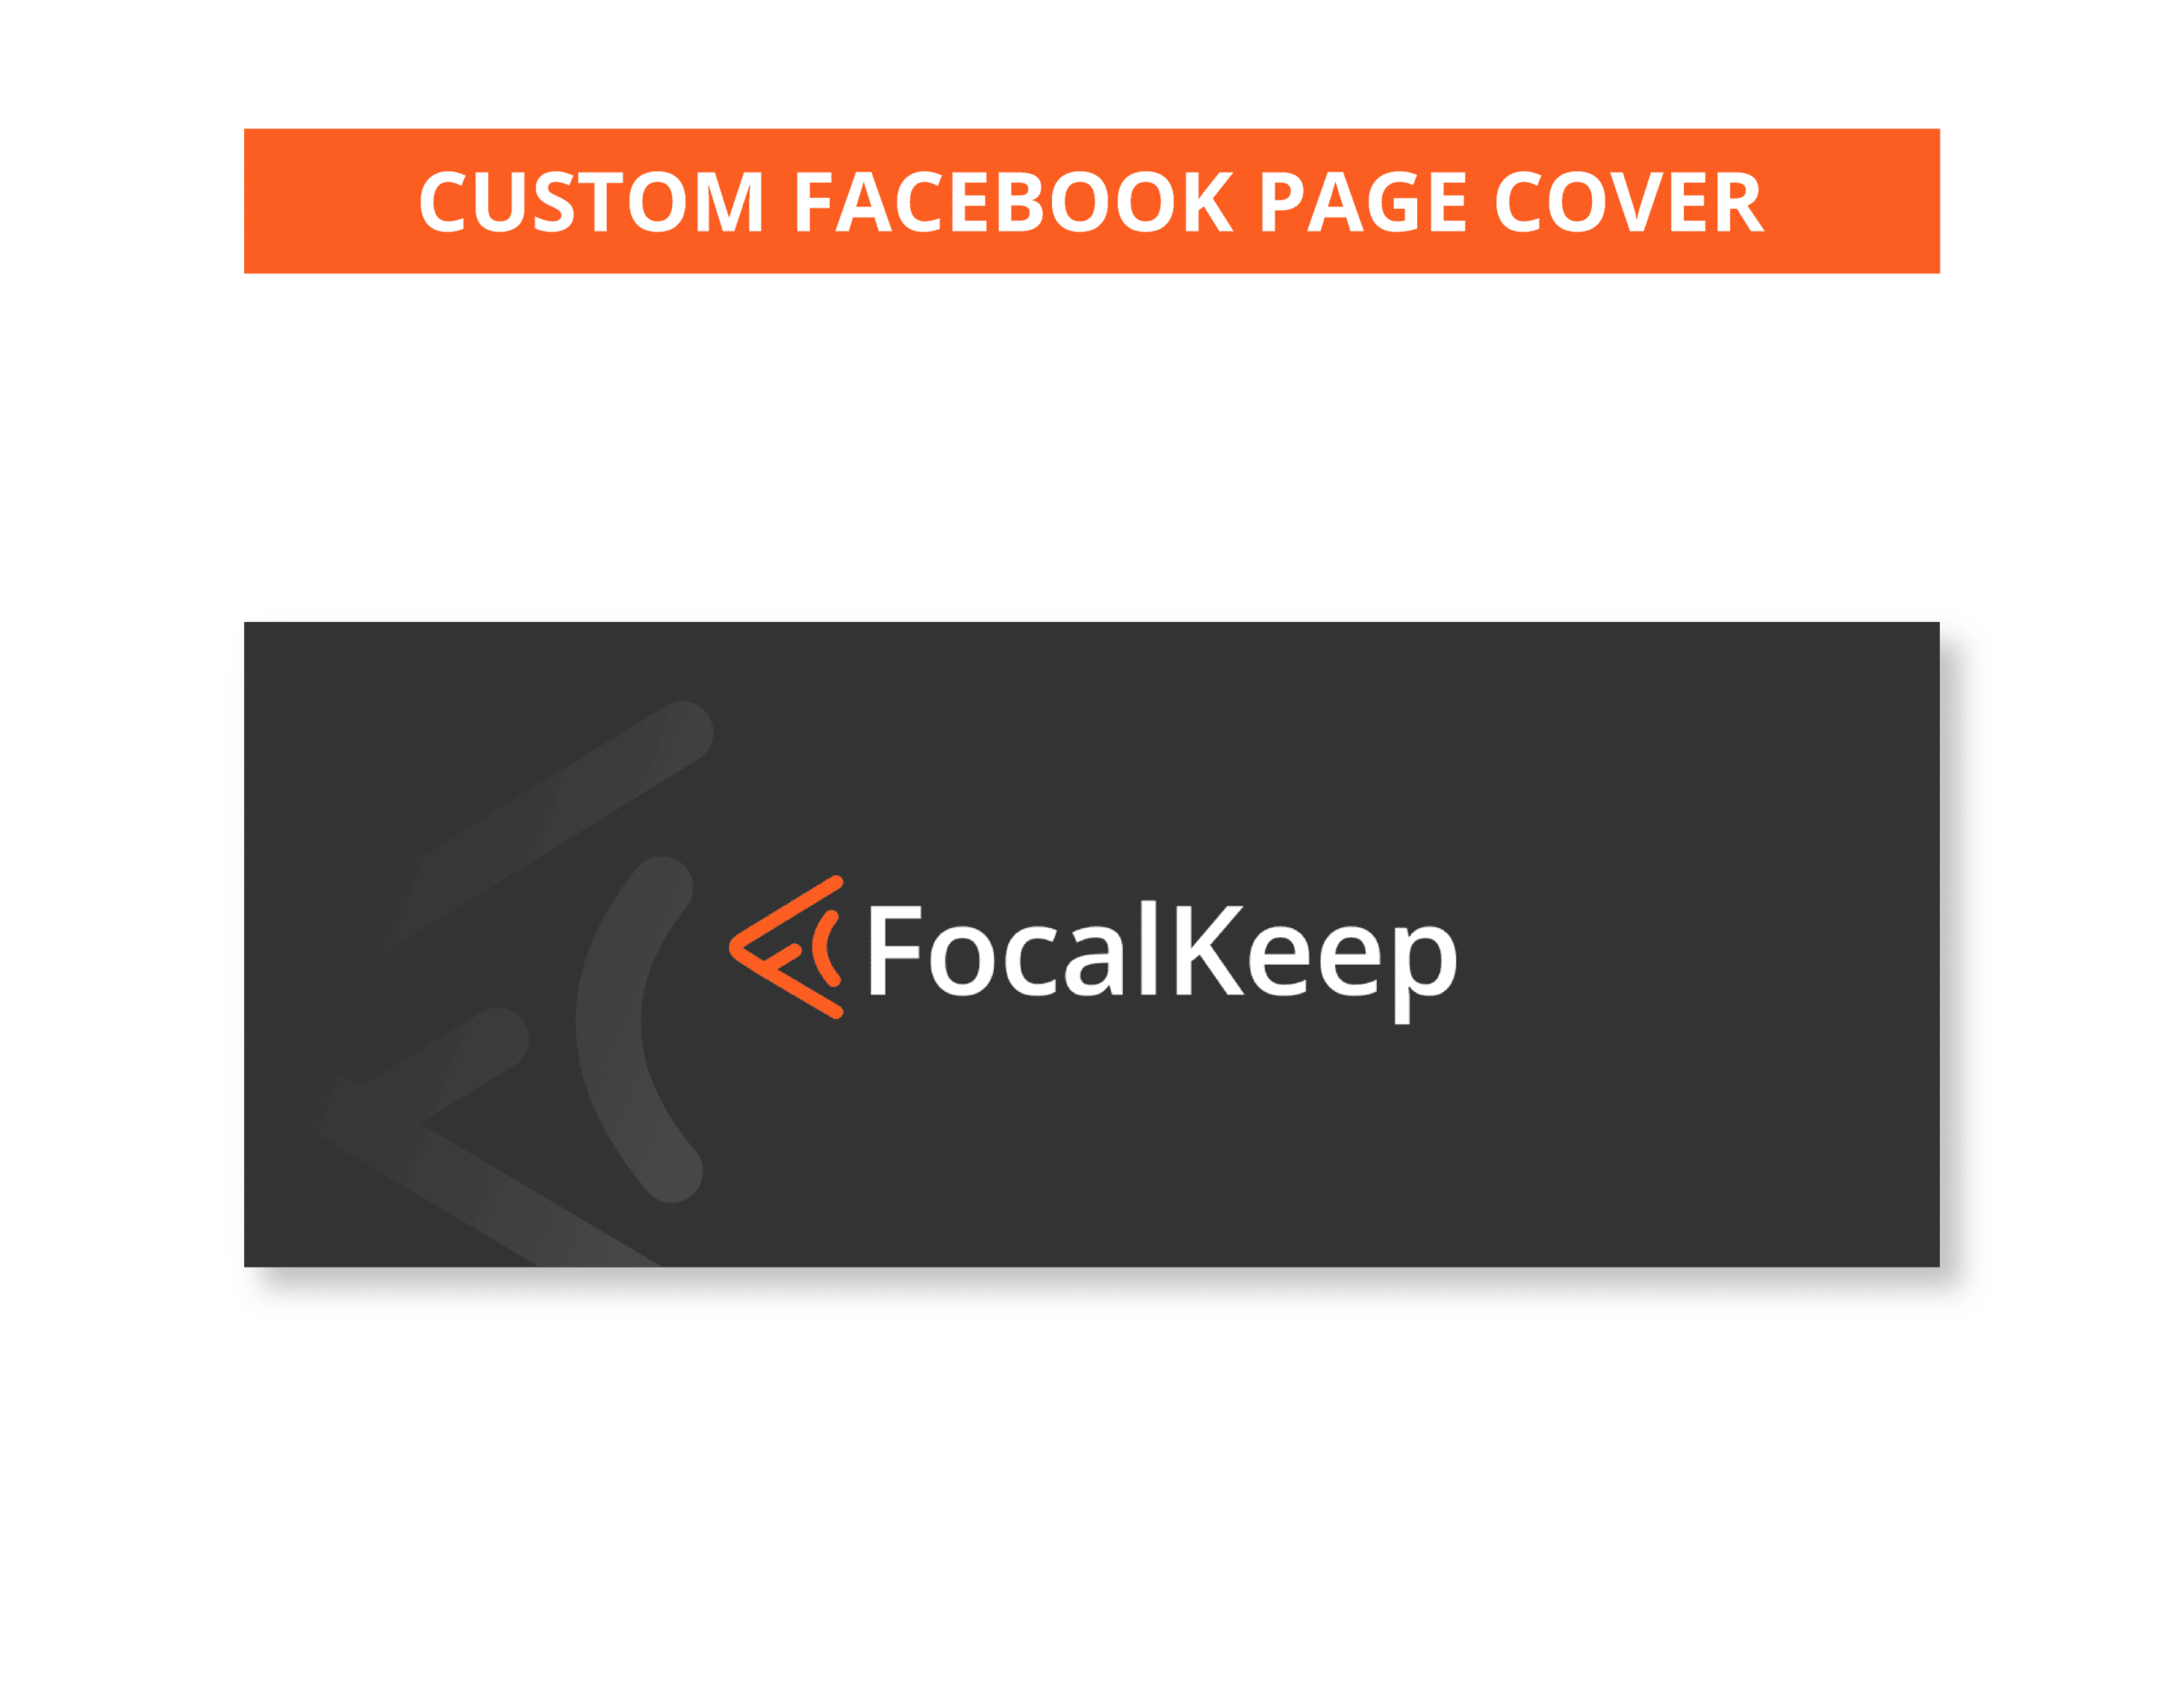 06Focal_Keep__Custom Facebook Page Cover